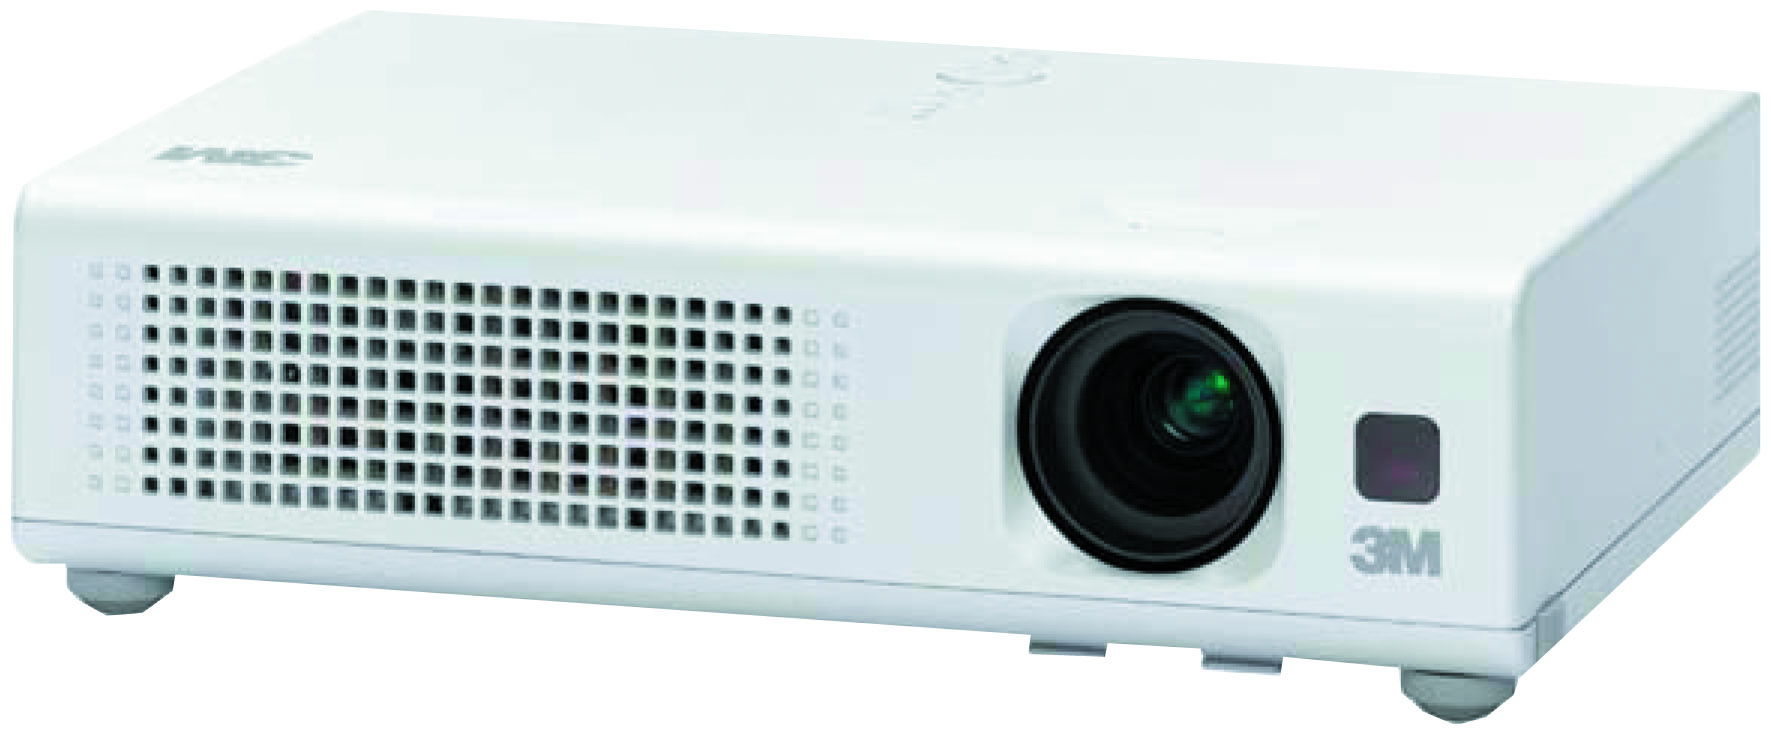 *3M OH projector,S55i, 2000 Lumens